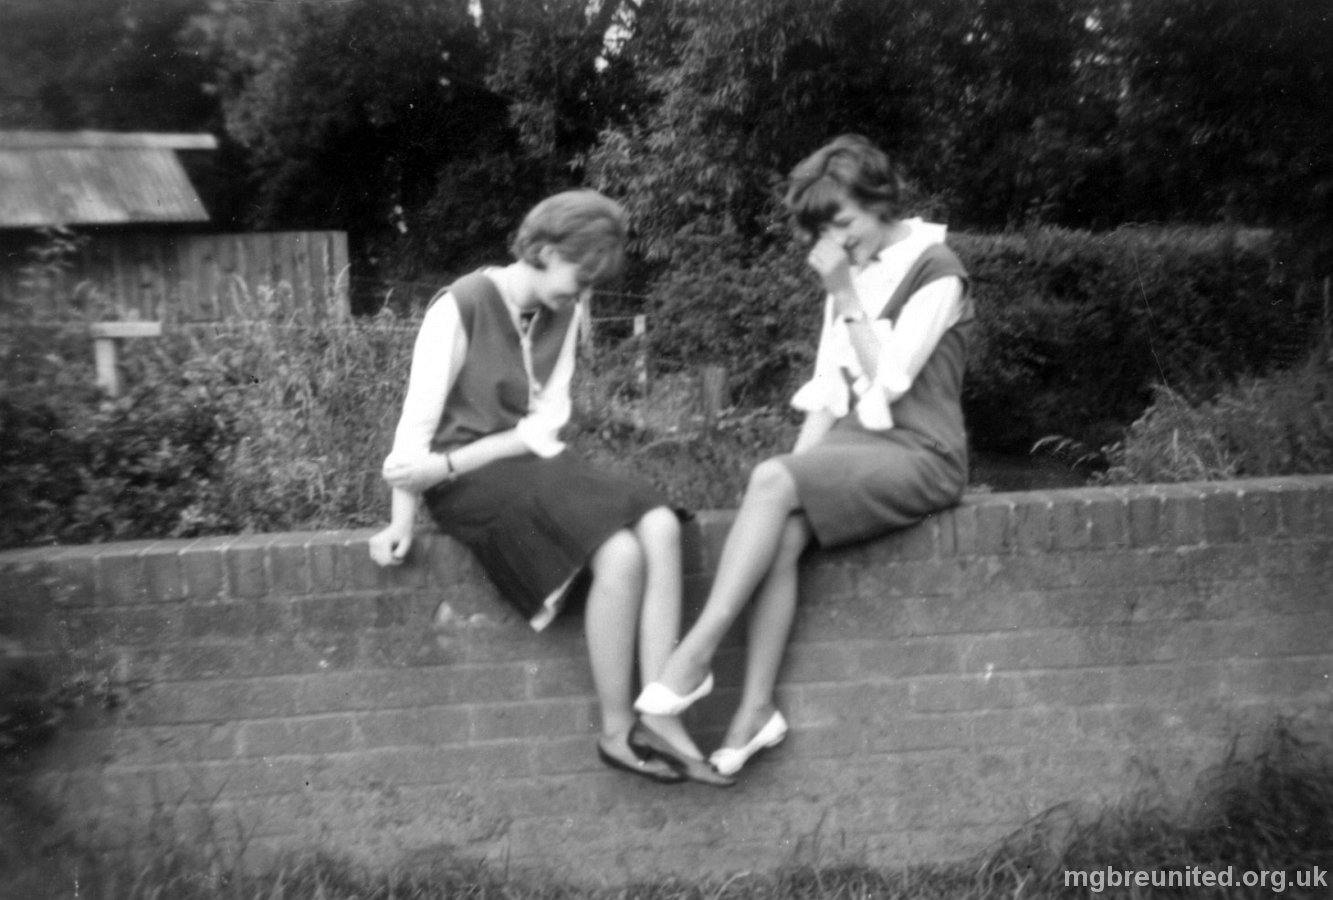 1964 Val Page and Susan Matthews at Winthorpe cricket ground 1964.